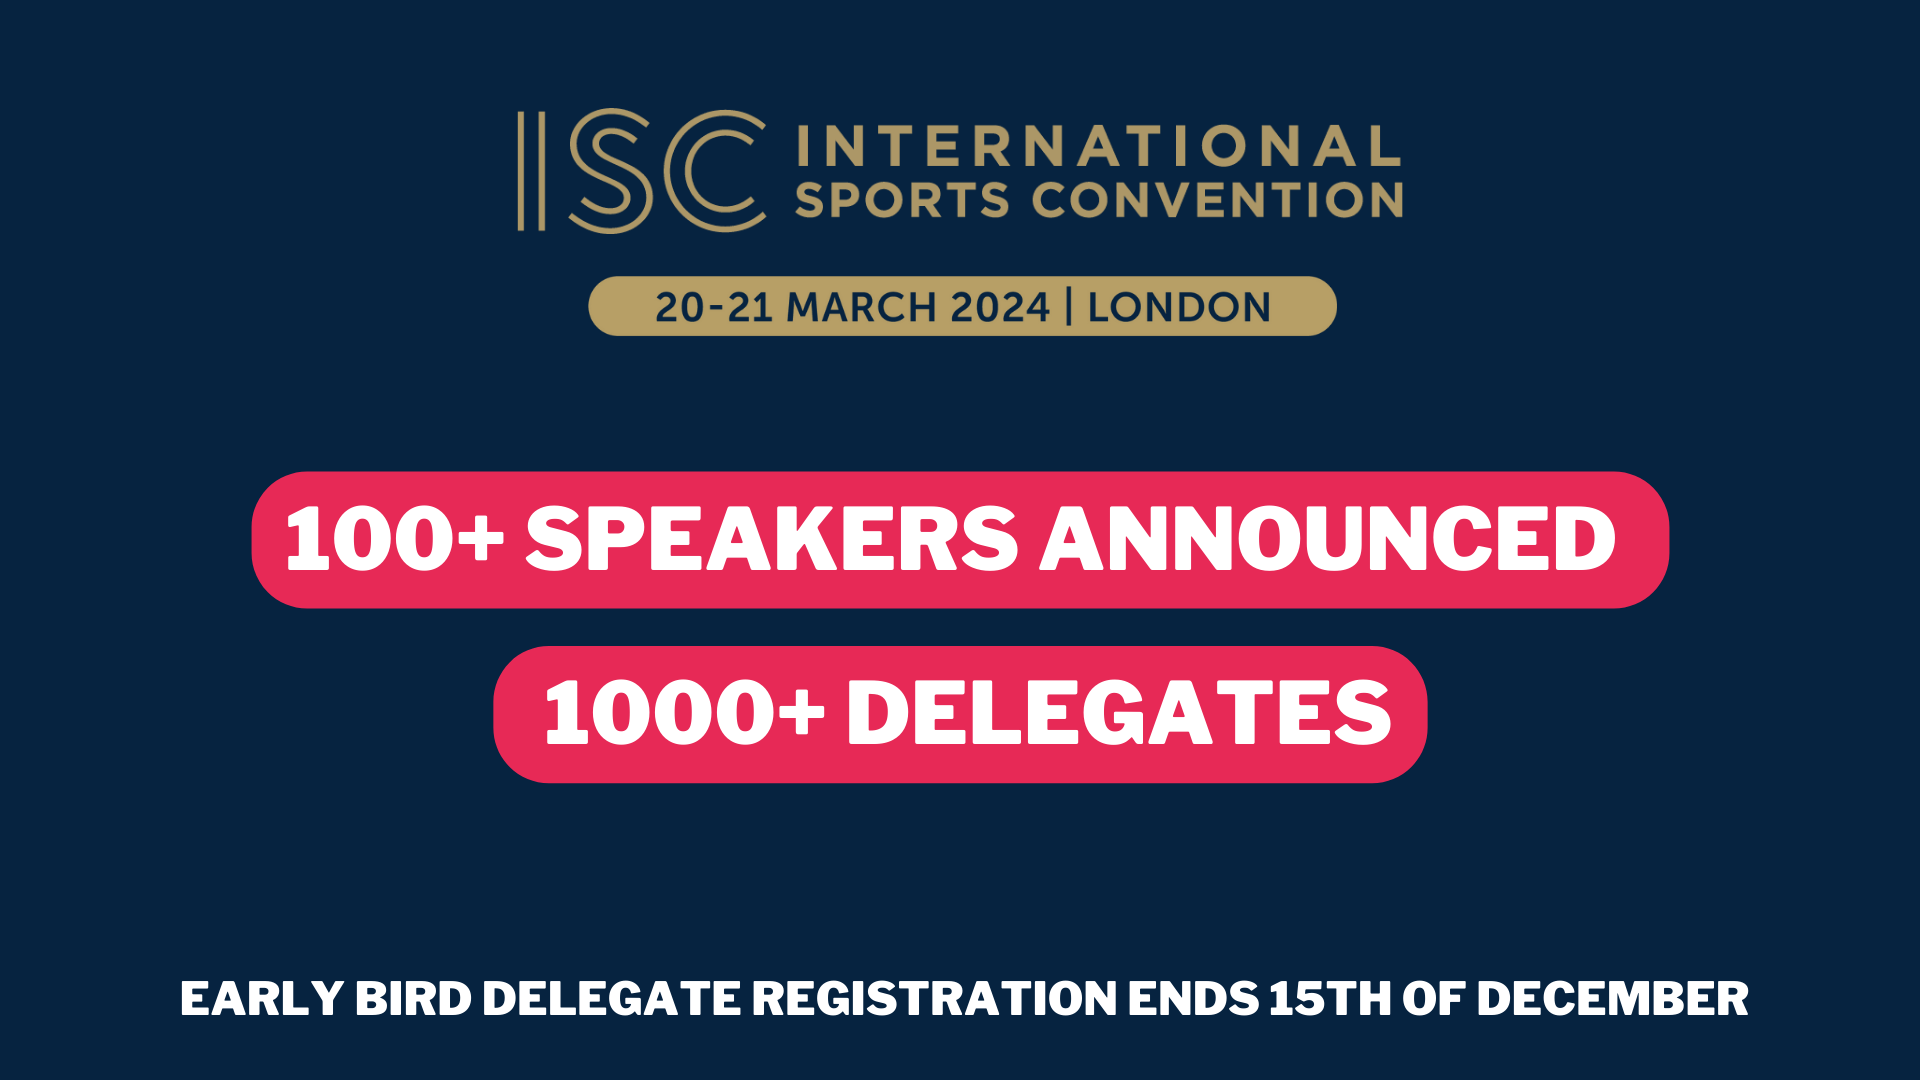 KEY INFORMATION FOR ISC 2024 International Sports Convention